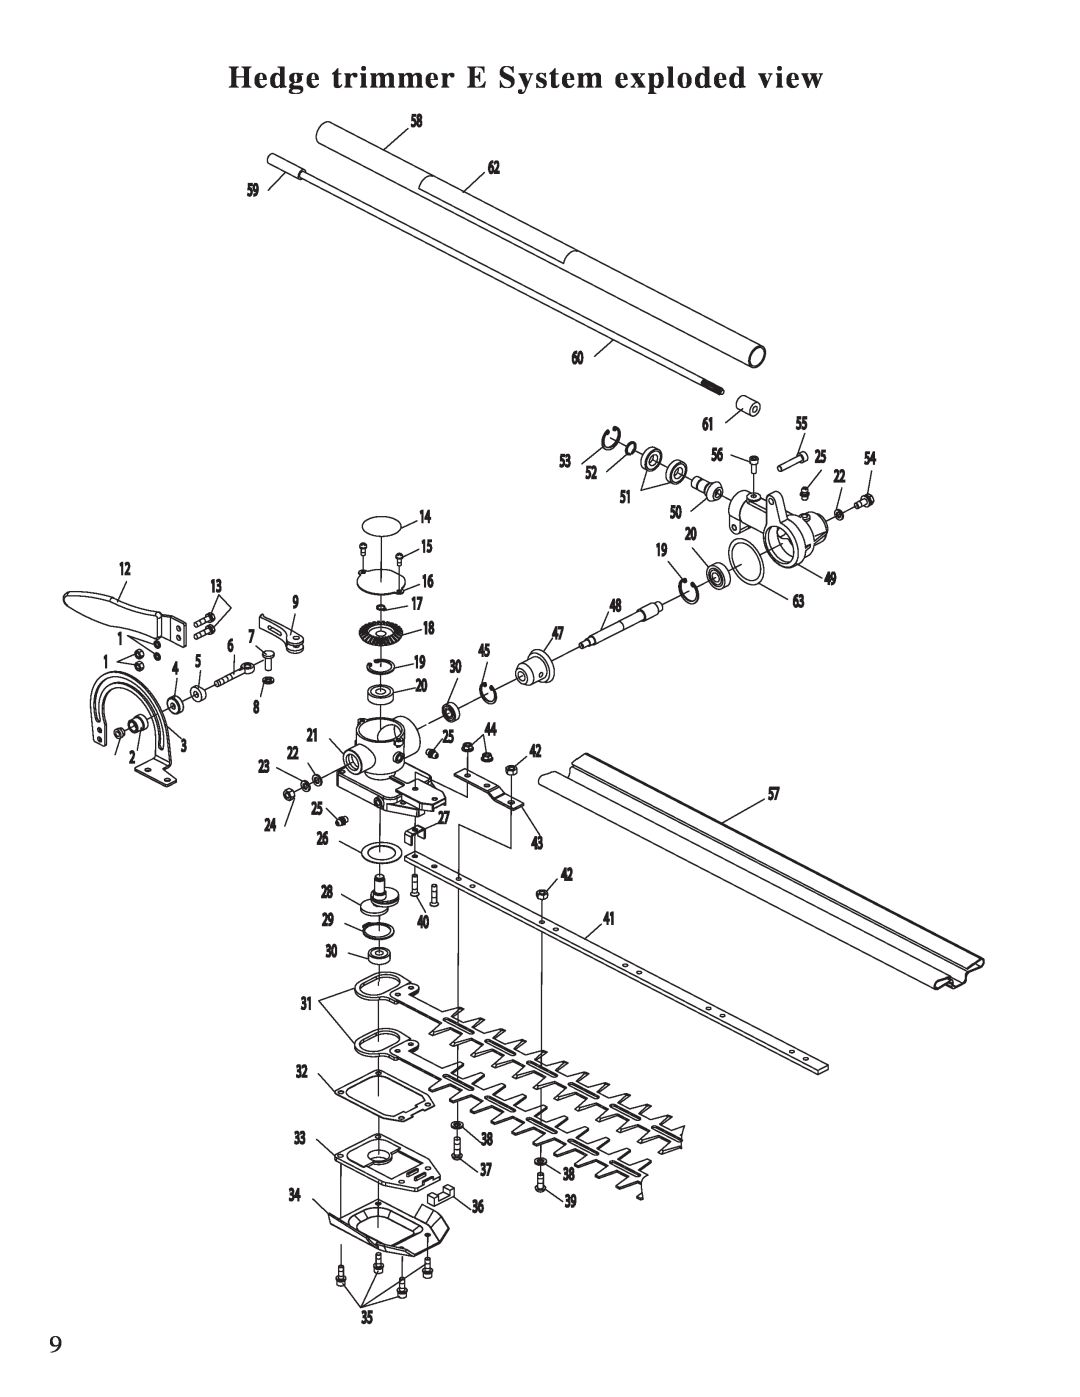 Mantis Hedge Trimmer E System owner manual Hedge trimmer E System exploded view, 1847, 4041 